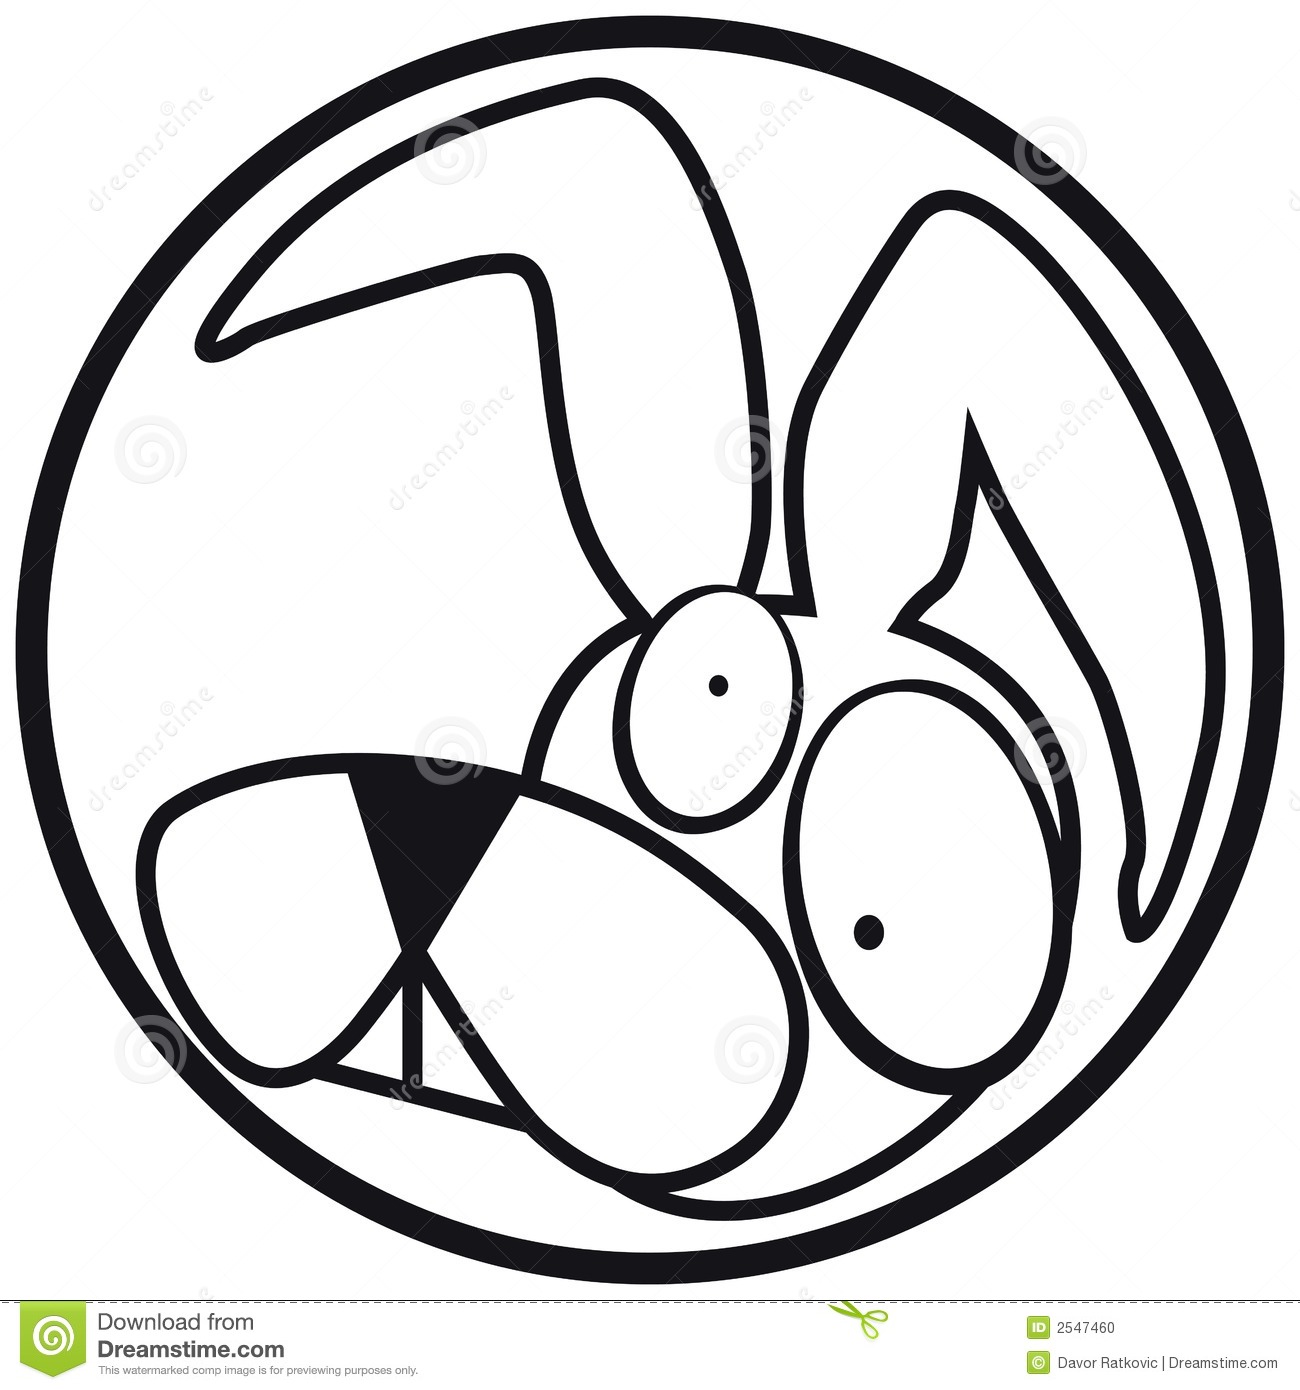 More Similar Stock Images Of   Pets Icon Bunny B W